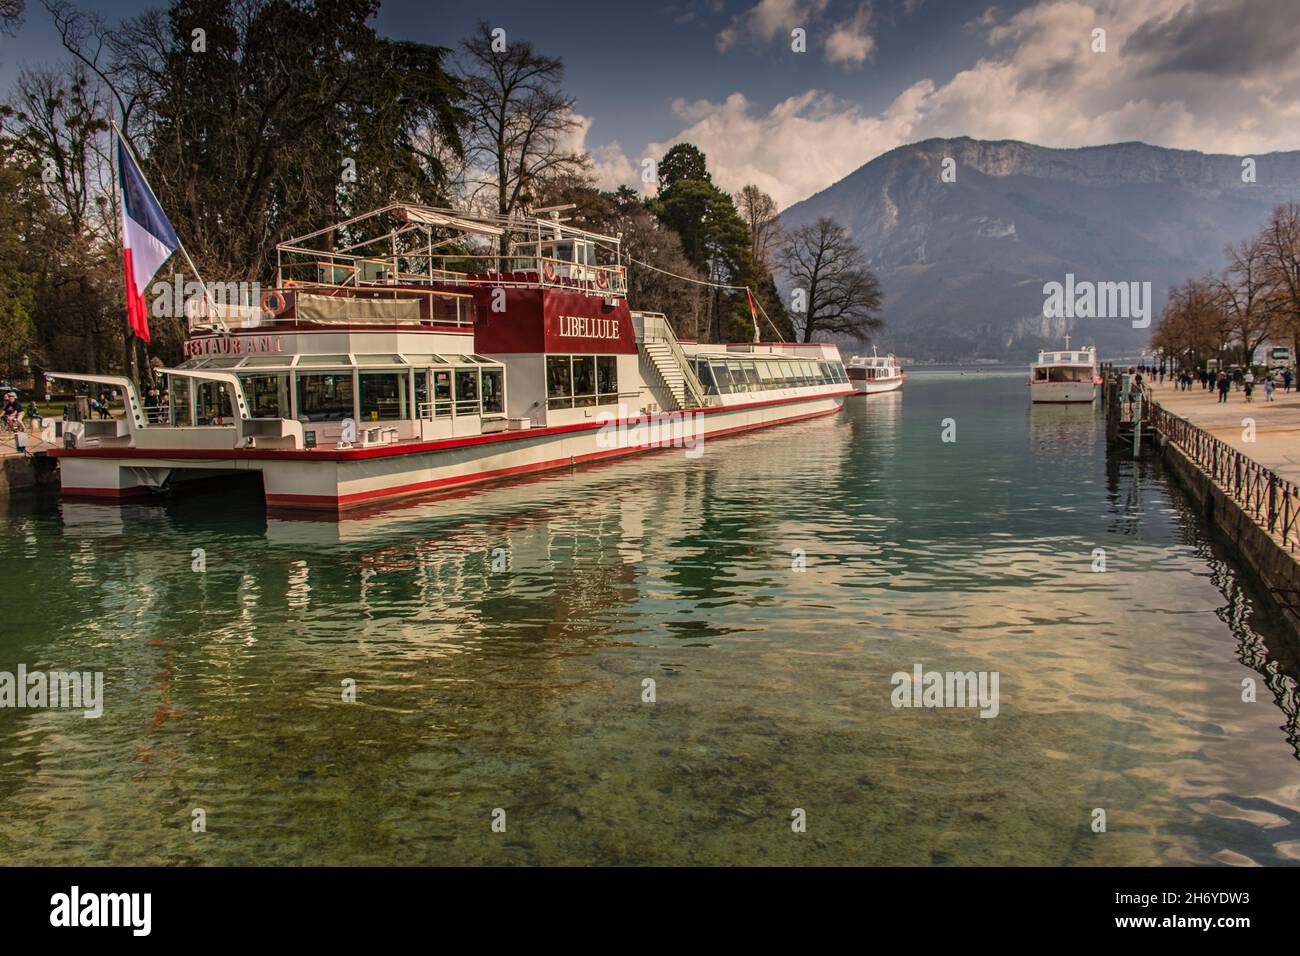 Libellule: anchored tourism boat in Annecy lake, France Stock Photo